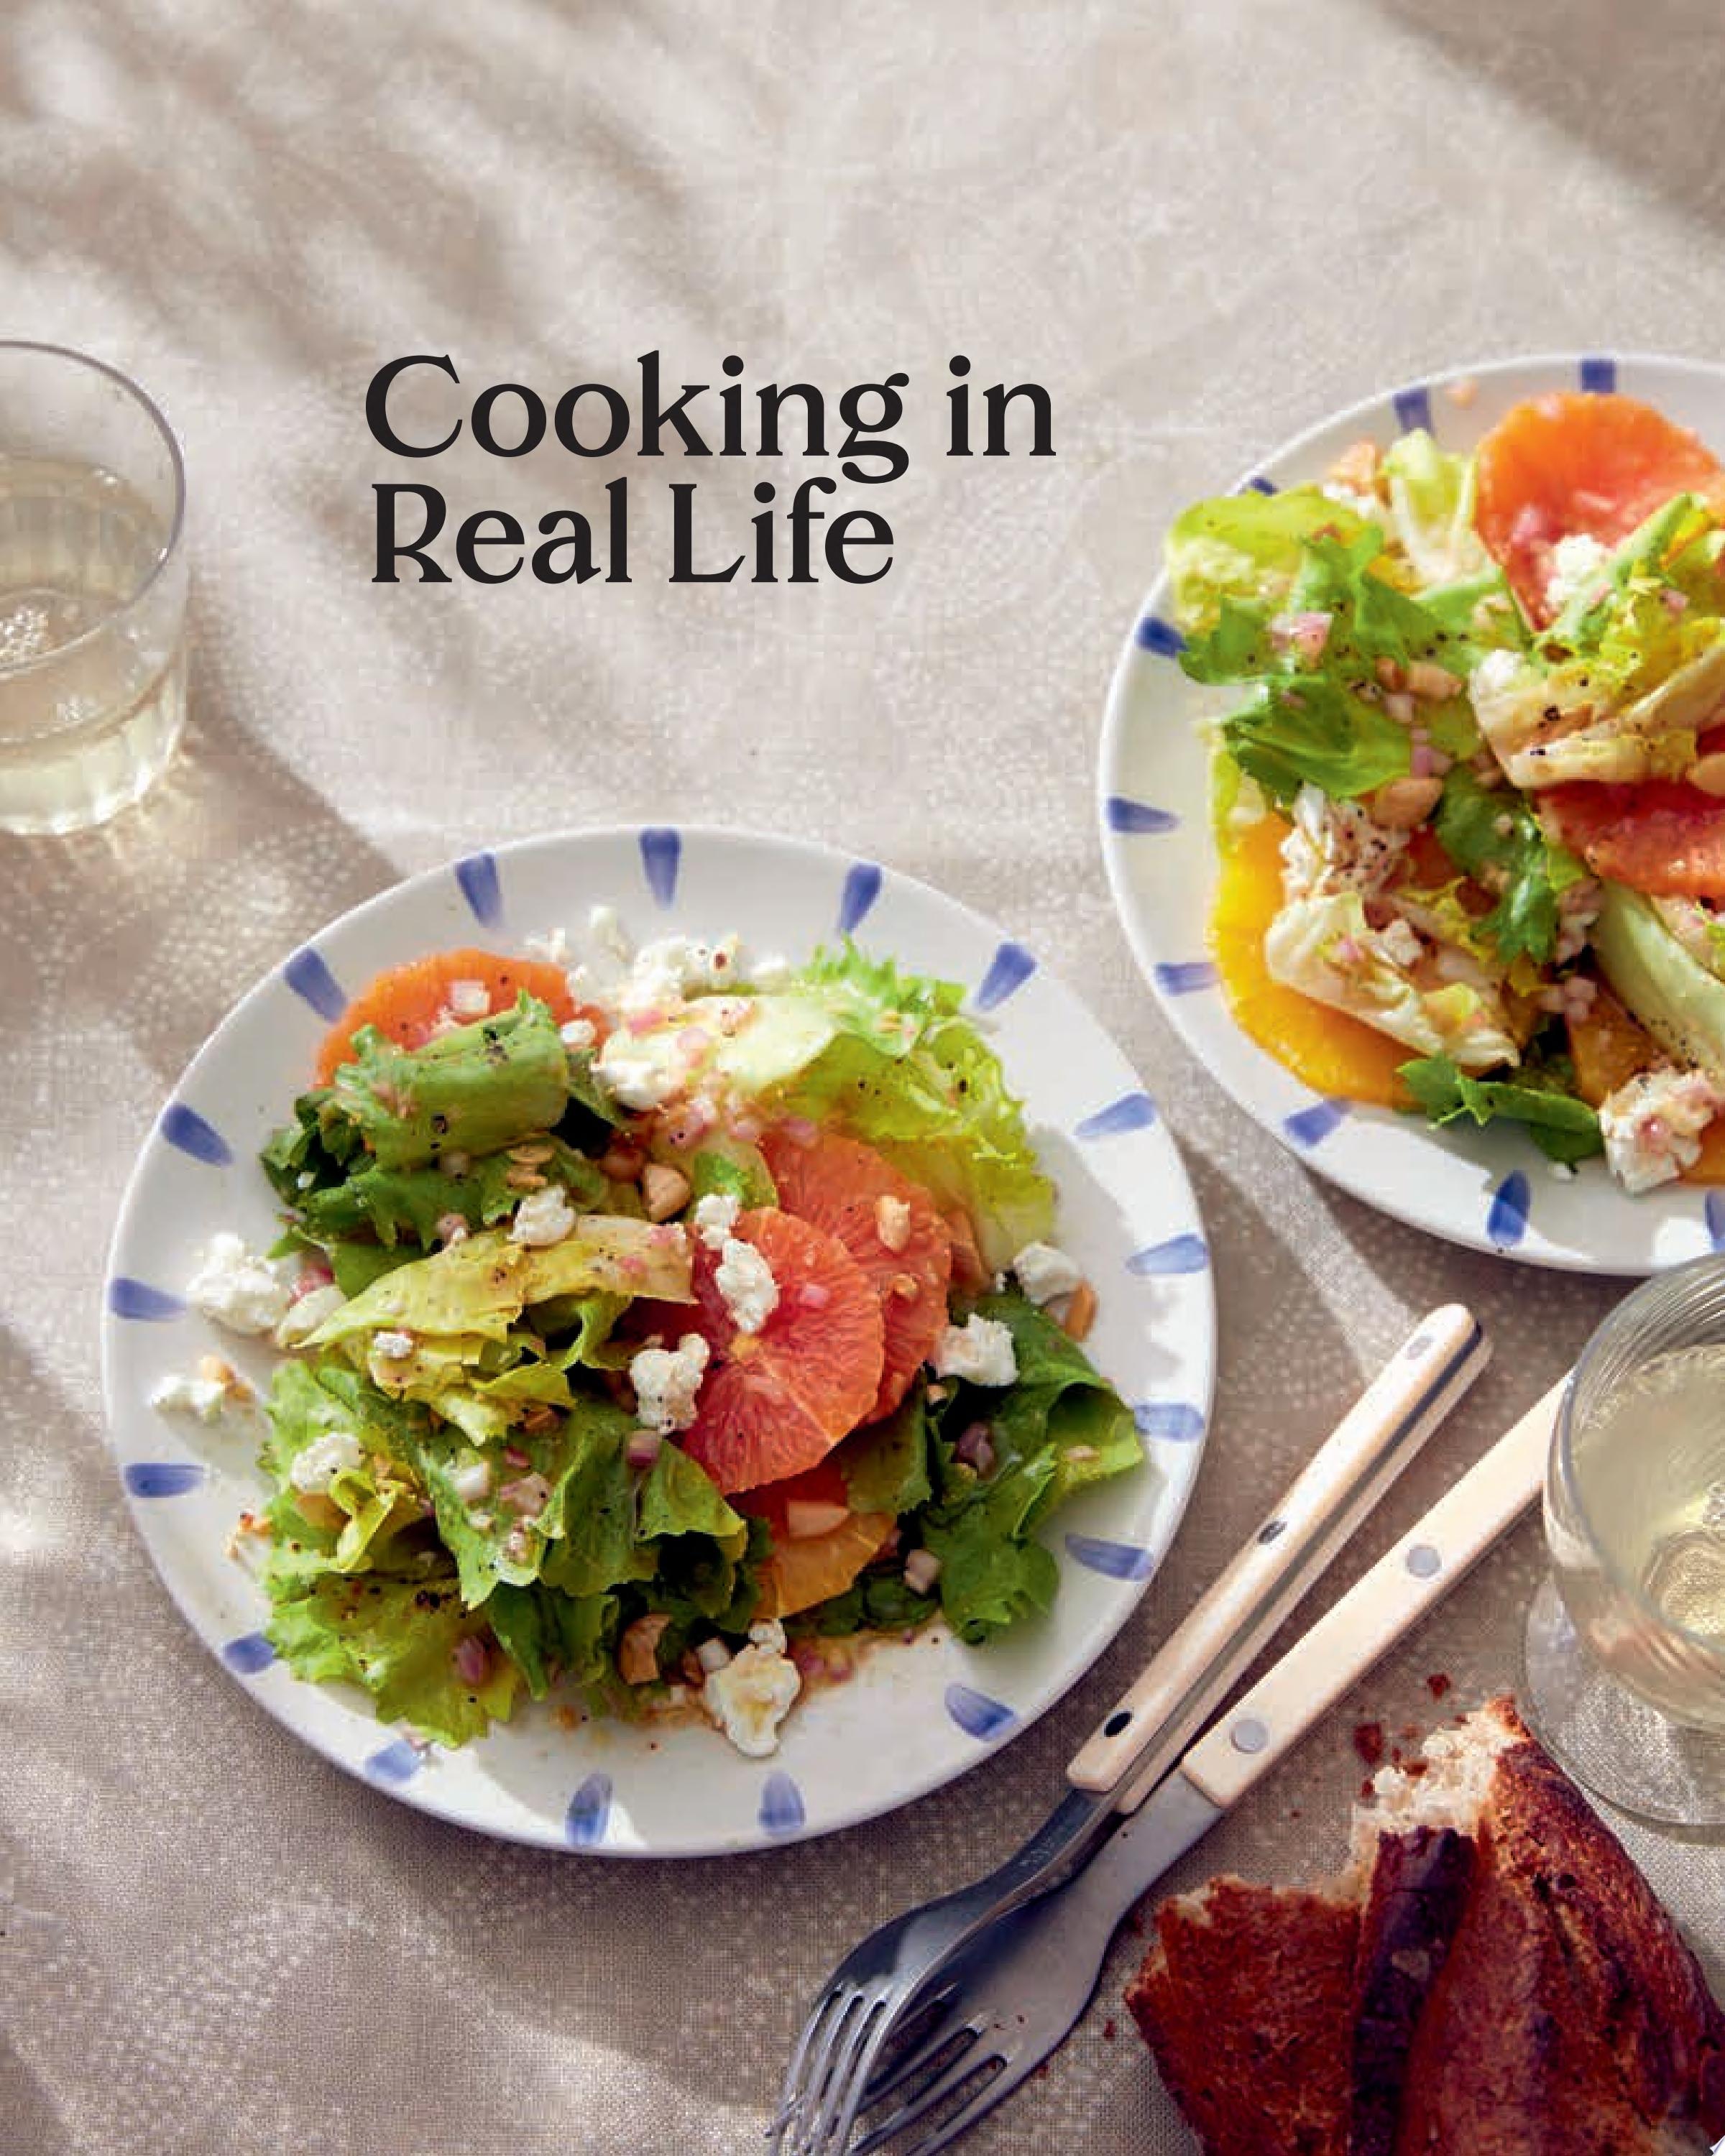 Image for "Cooking in Real Life"